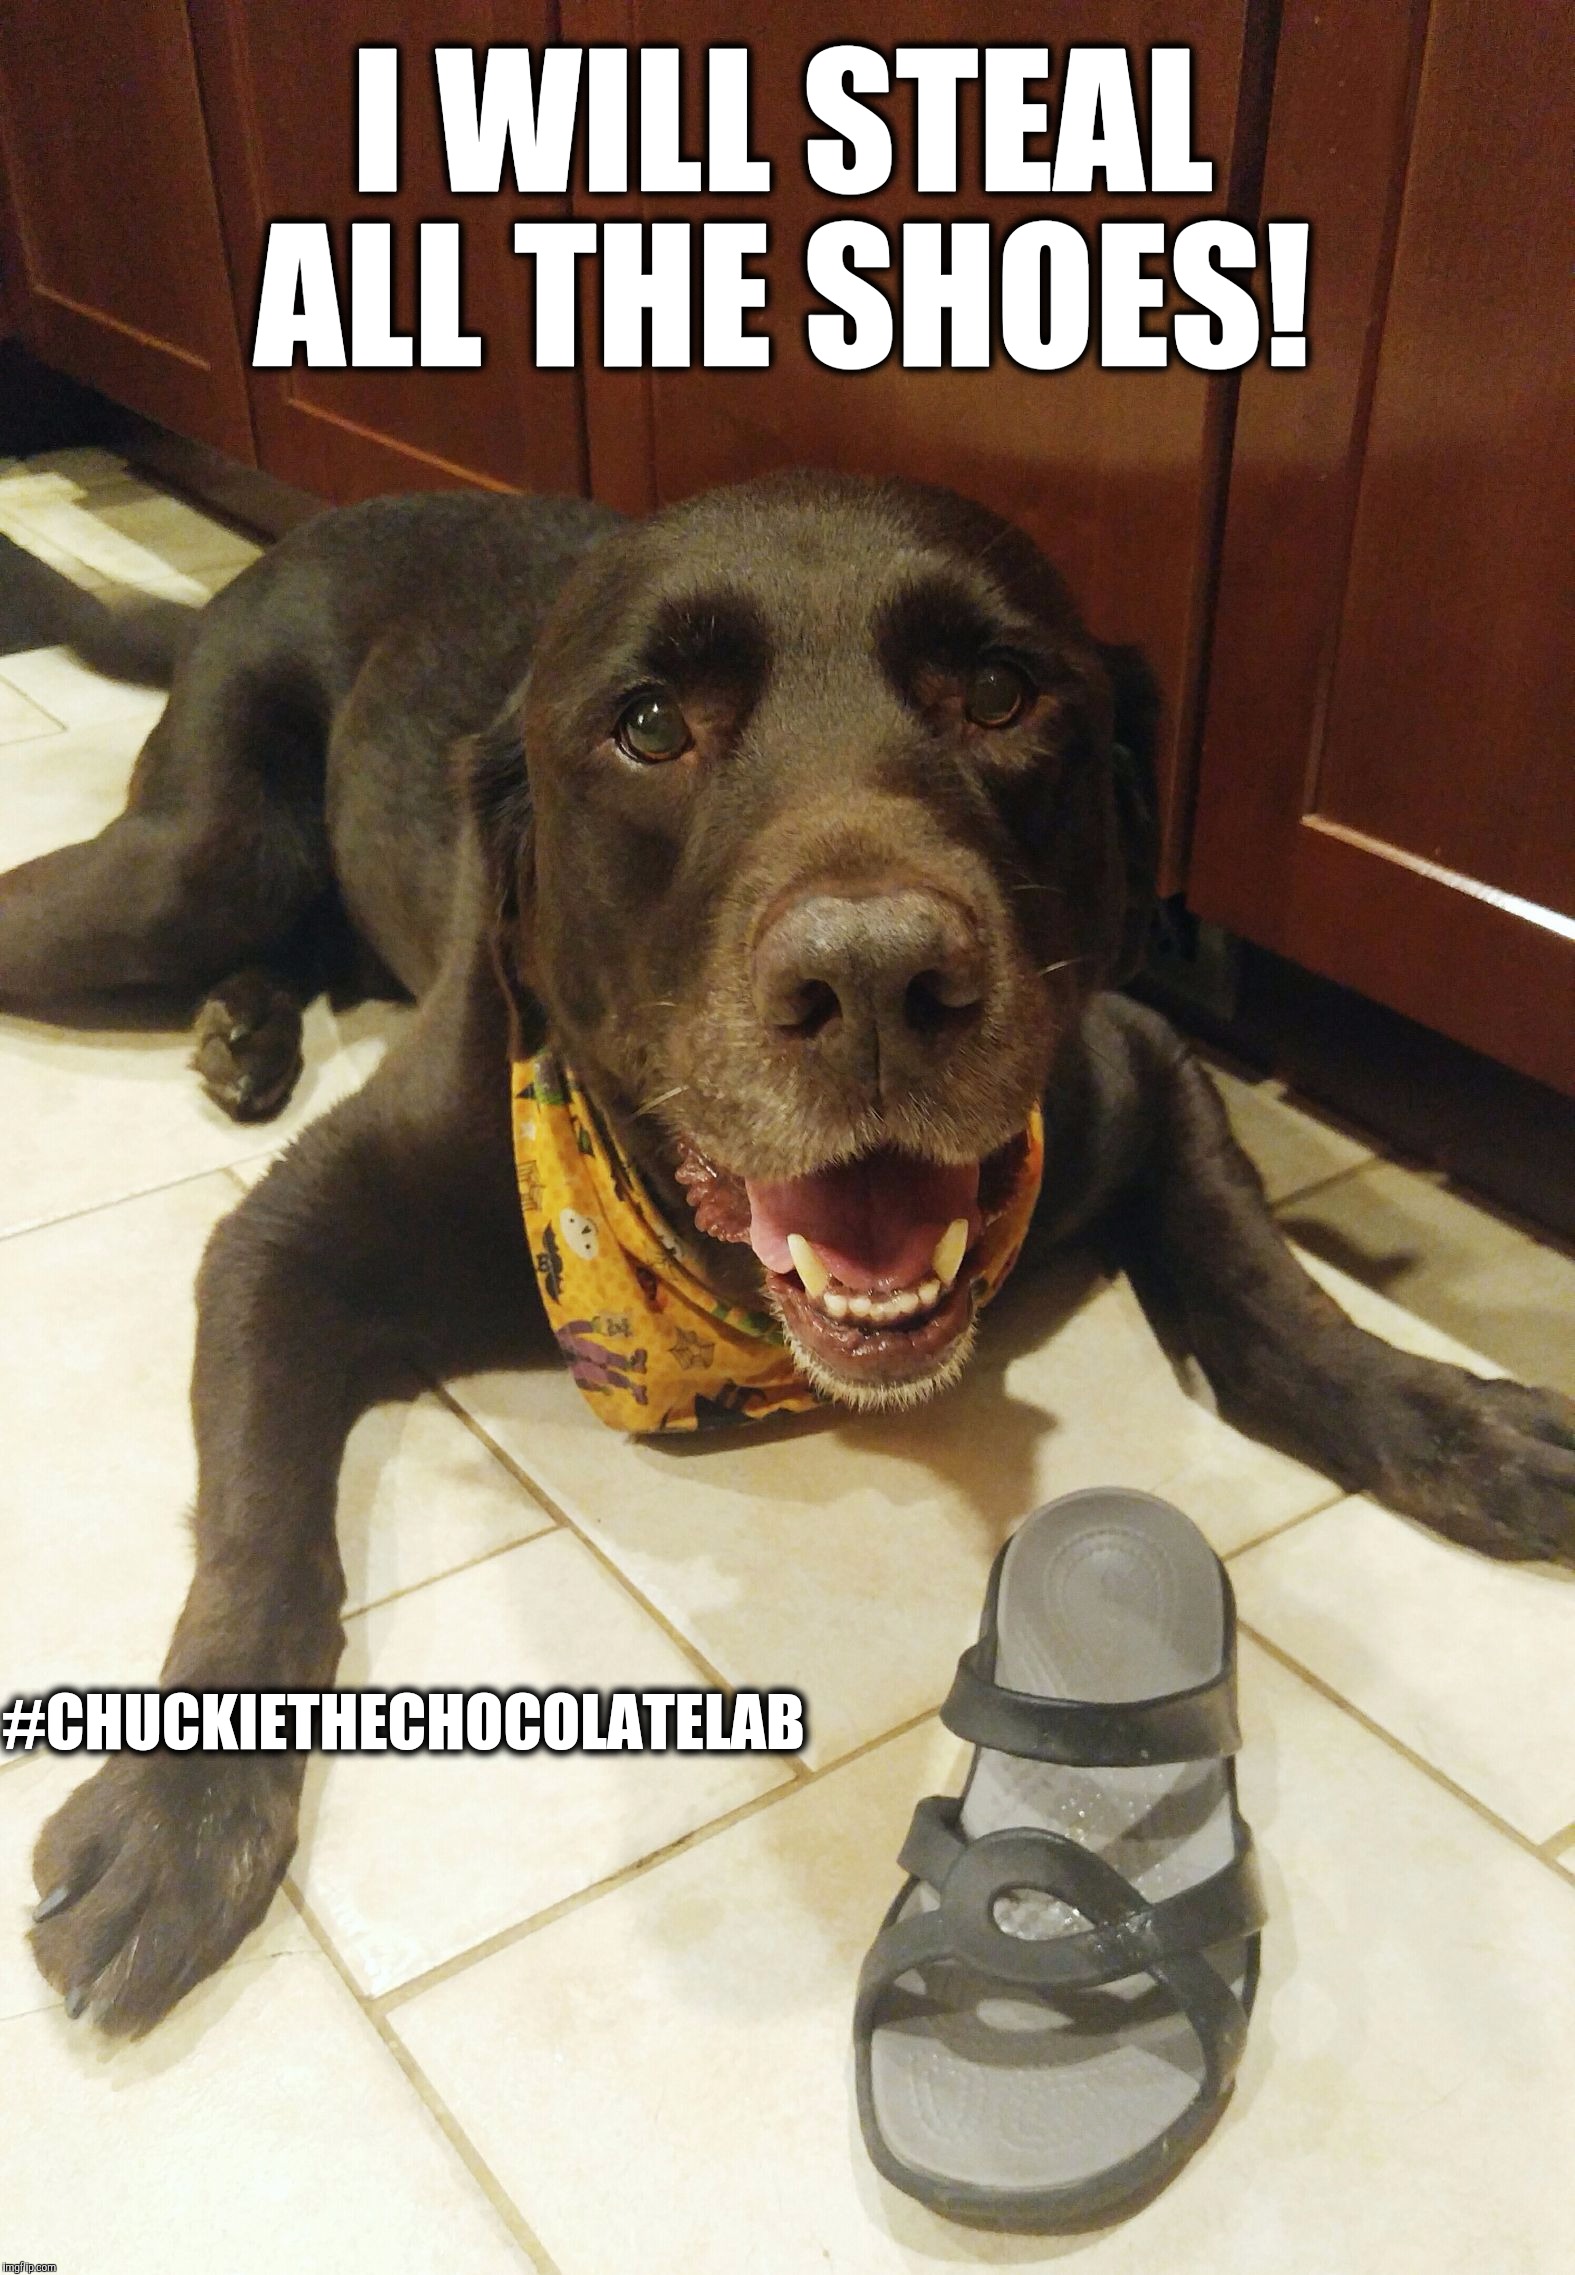 I will steal all the shoes!  | I WILL STEAL ALL THE SHOES! #CHUCKIETHECHOCOLATELAB | image tagged in chuckie the chocolate lab,i will steal all the shoes,funny,dogs,memes,labrador | made w/ Imgflip meme maker